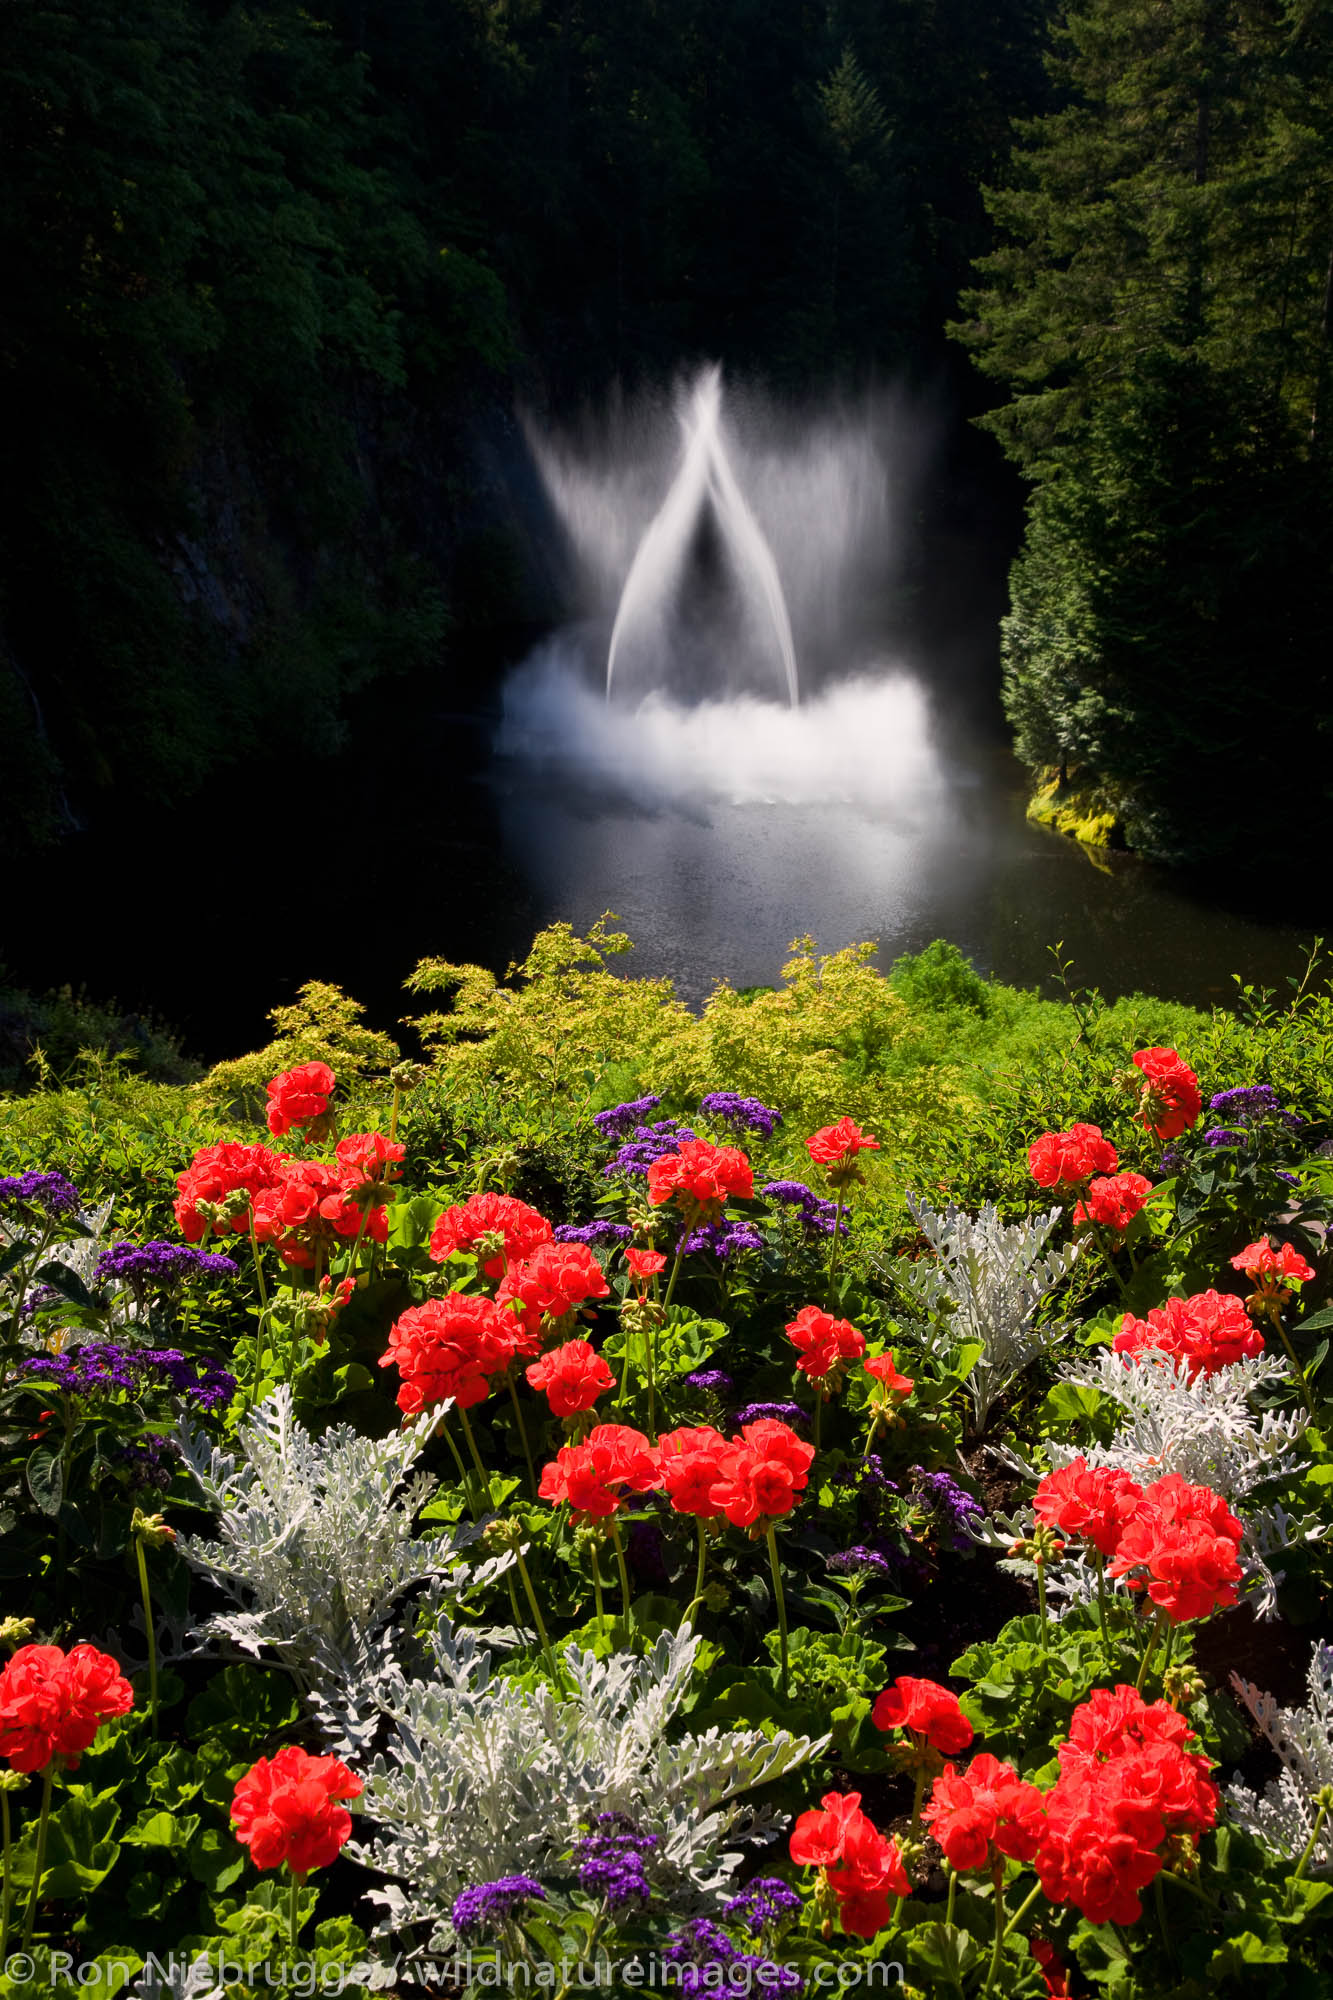 Ross Fountain at the Butchart Gardens, Victoria, Vancouver Island, British Columbia, Canada.